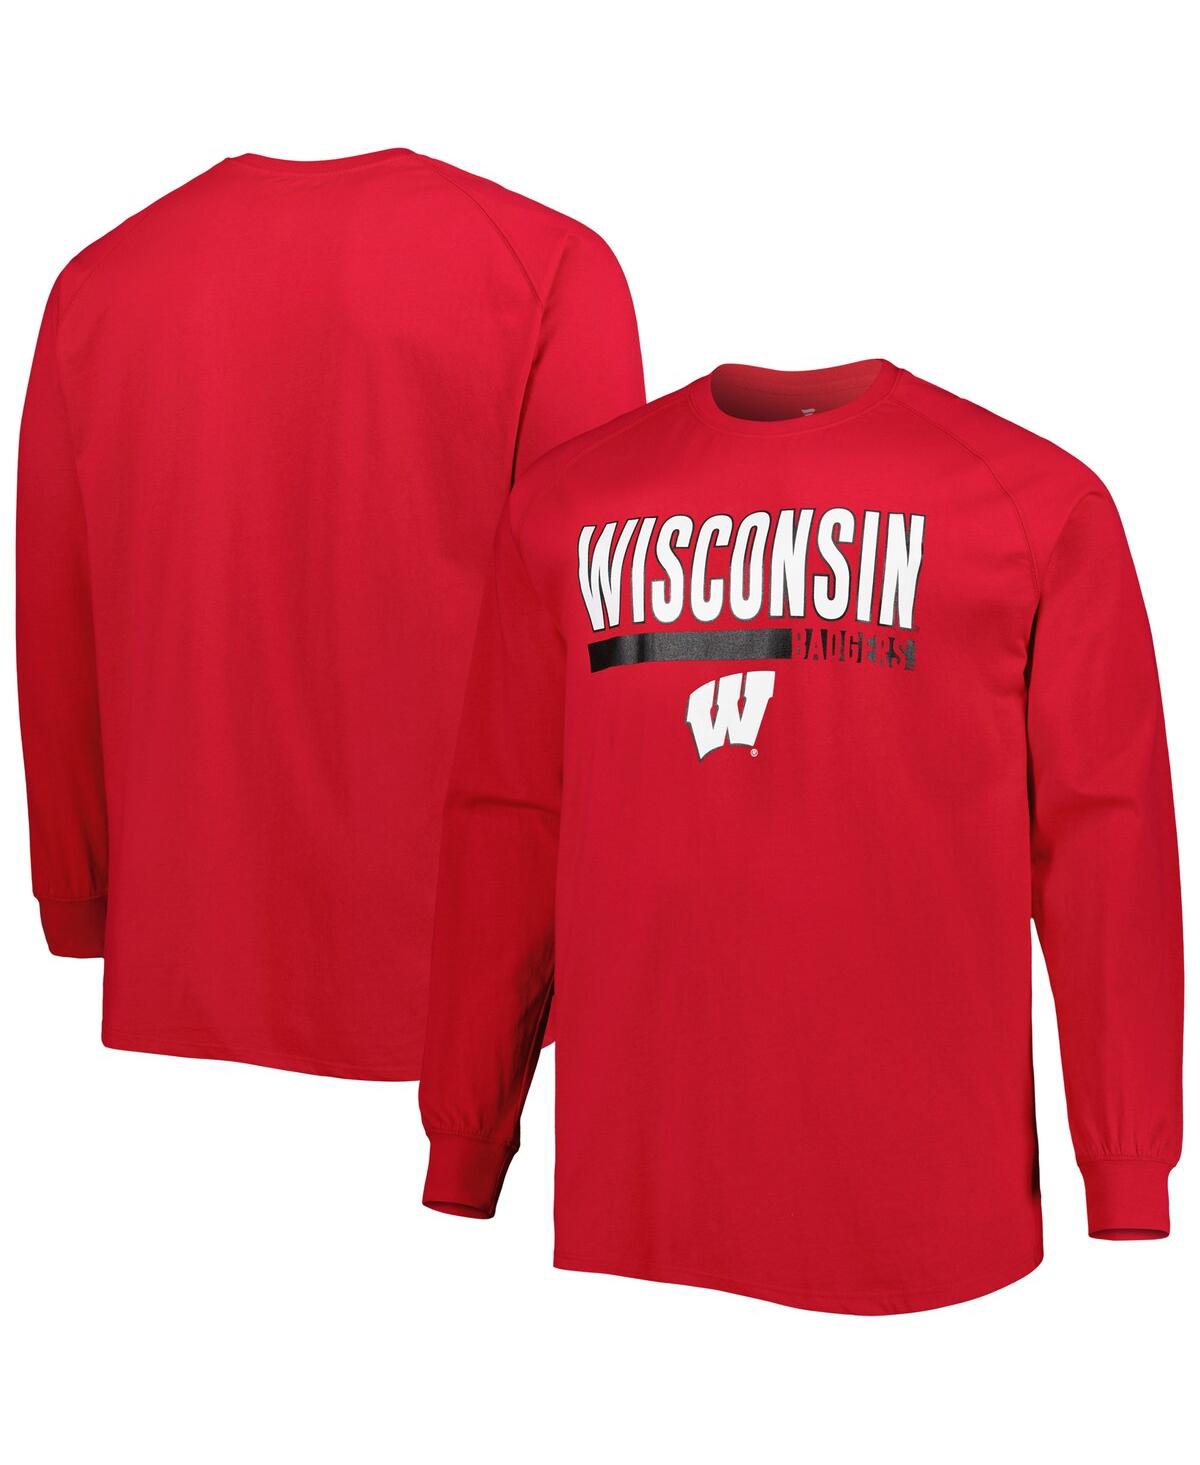 Men's Red Wisconsin Badgers Big and Tall Two-Hit Raglan Long Sleeve T-shirt - Red